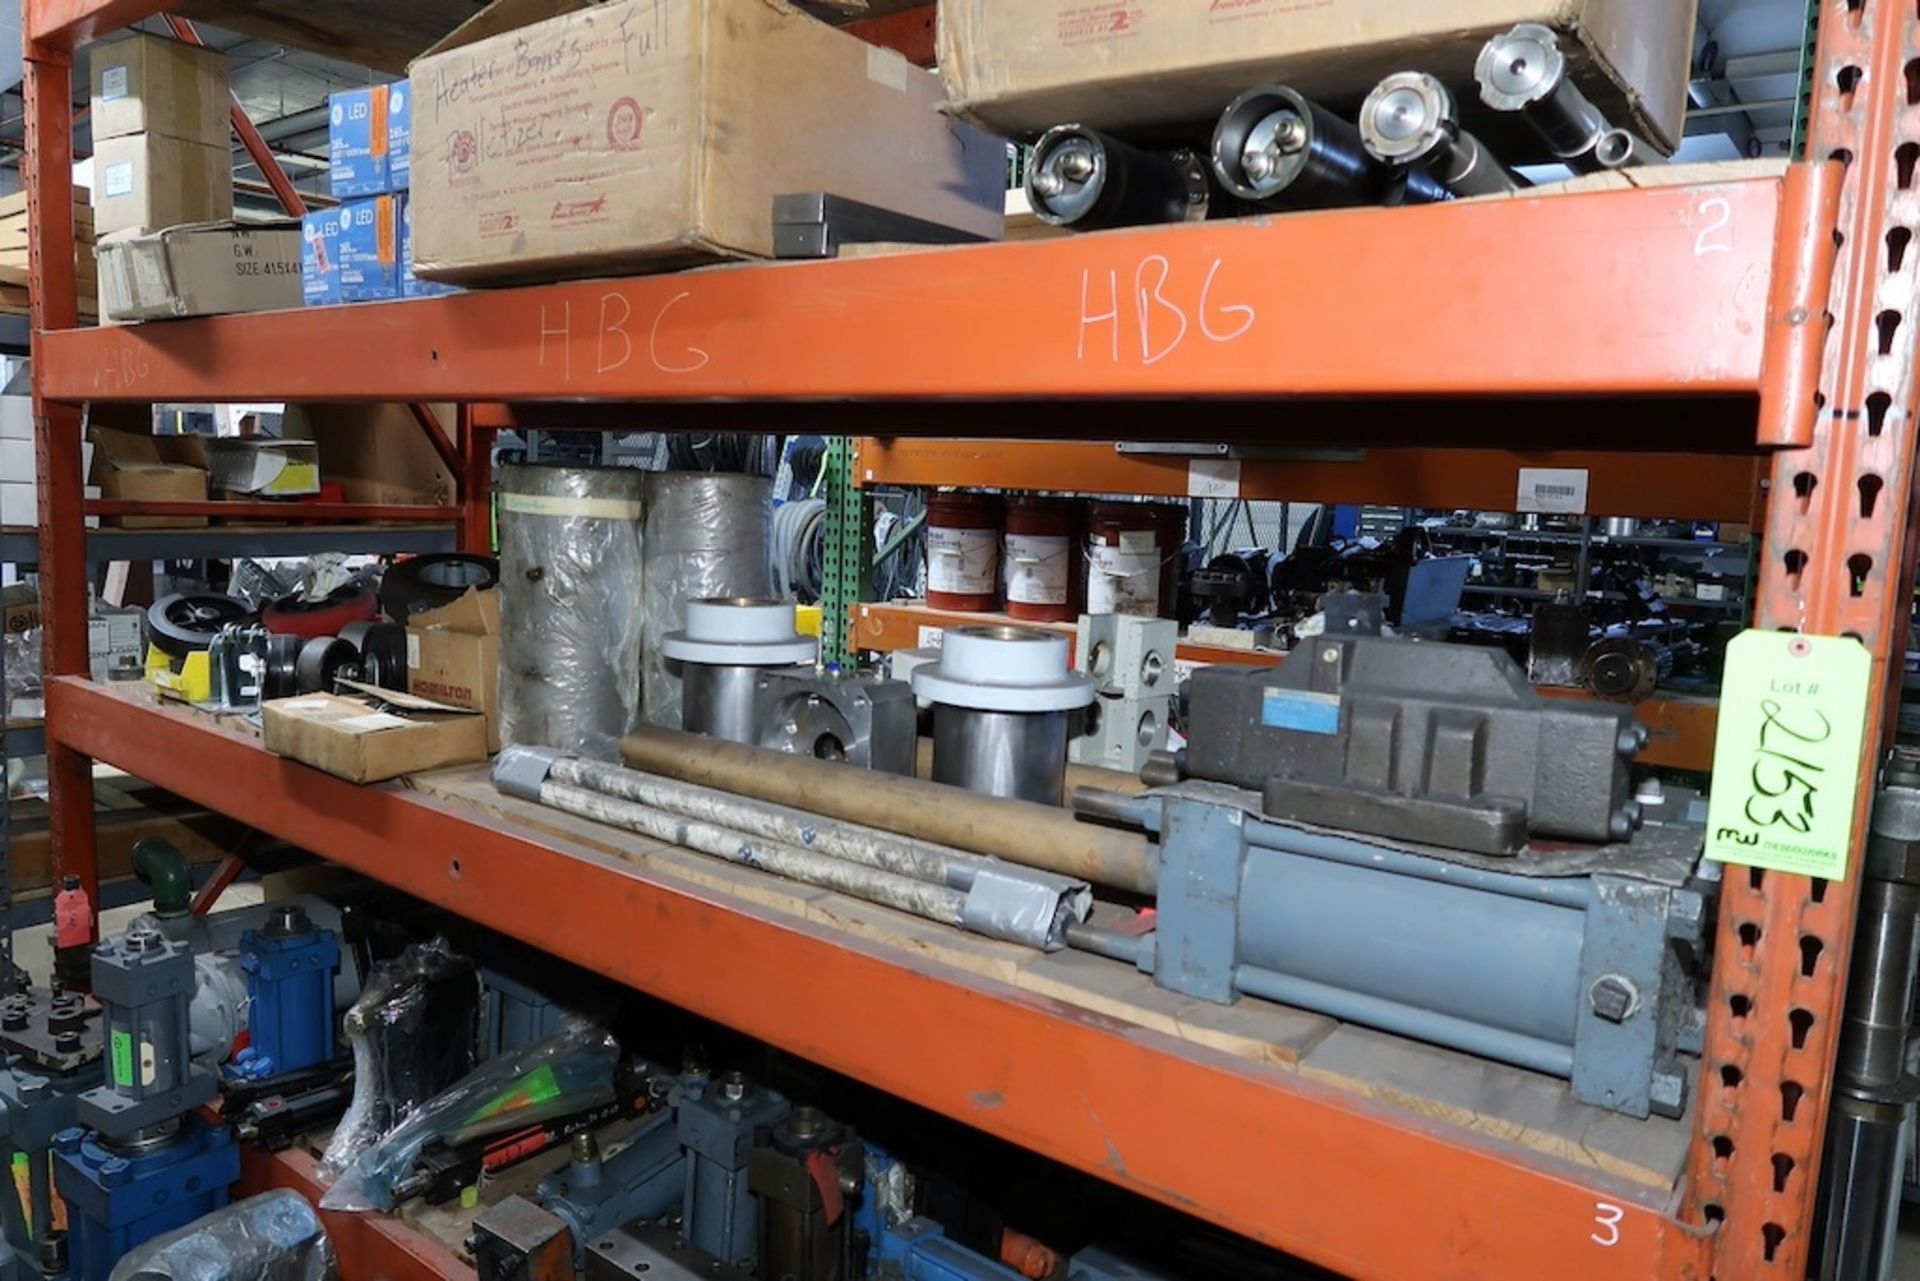 (1) Section of Pallet Racking with Assorted Spare Parts, Hydraulic Pumps, Heat Exchangers, Etc. - Image 13 of 18